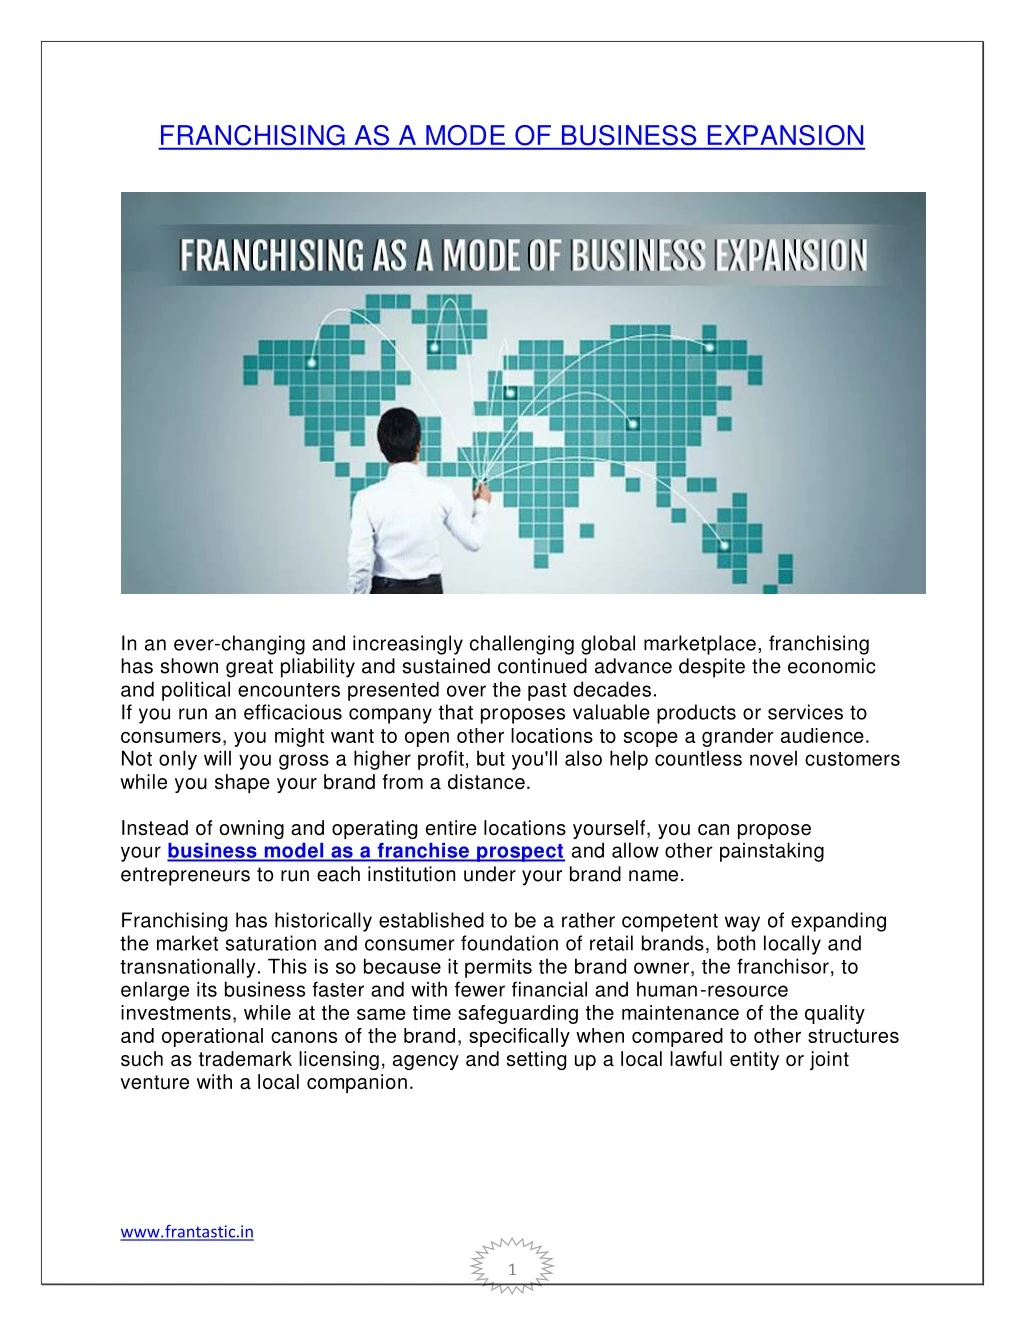 franchising as a mode of business expansion